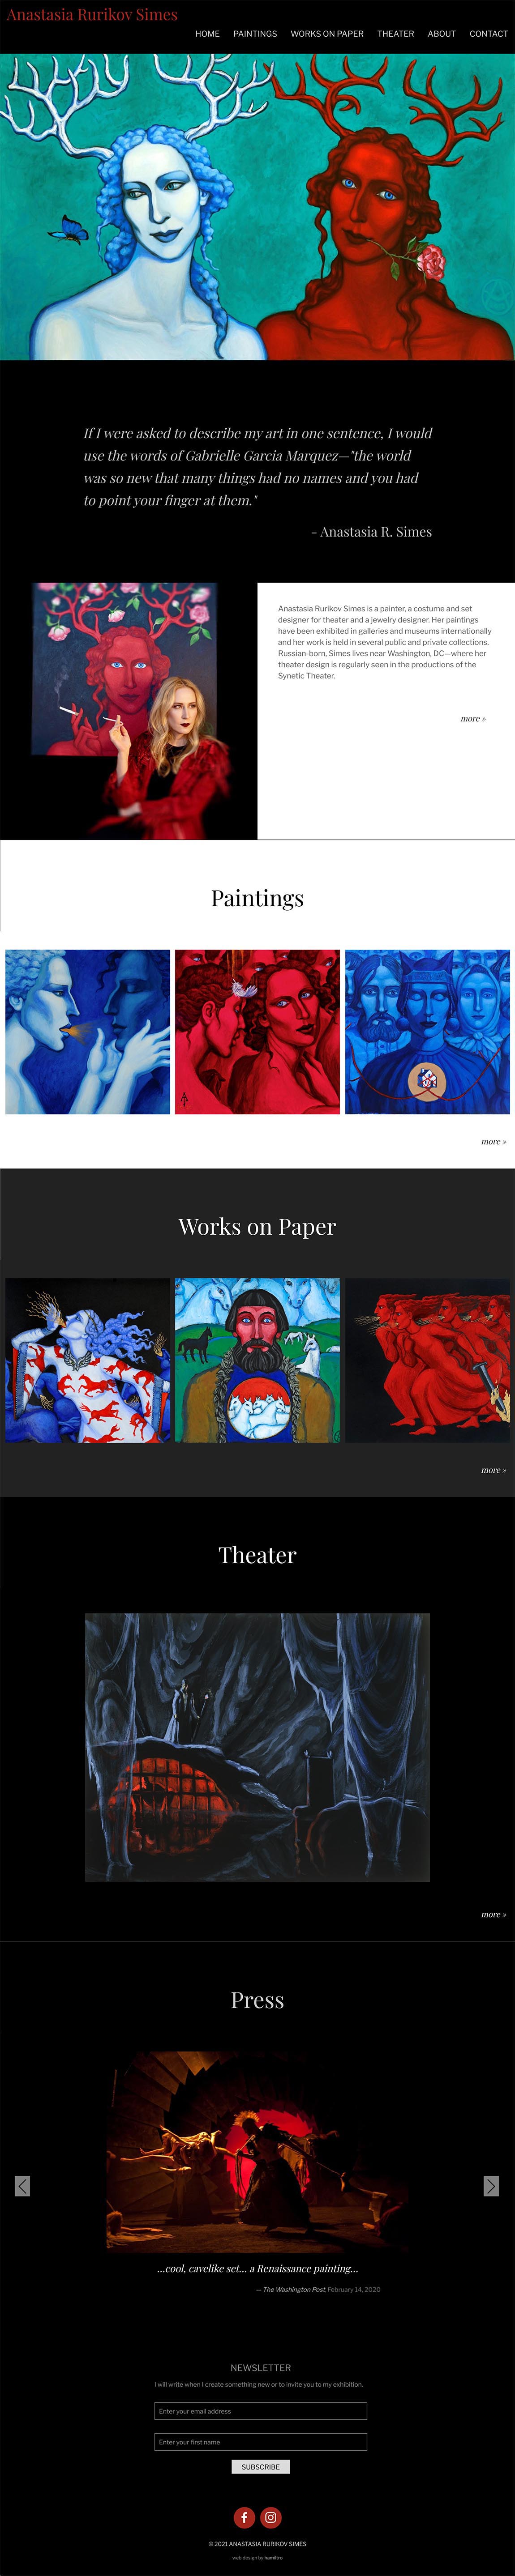 website design for artists-galleries - A bold and dramatic website for a bold and dramatic artist and set designer. A long-scrolling homepage introduces this multi-talented artist and her work.																																									 - long-scrolling page with rich visual sections to help a user find what they are looking for.